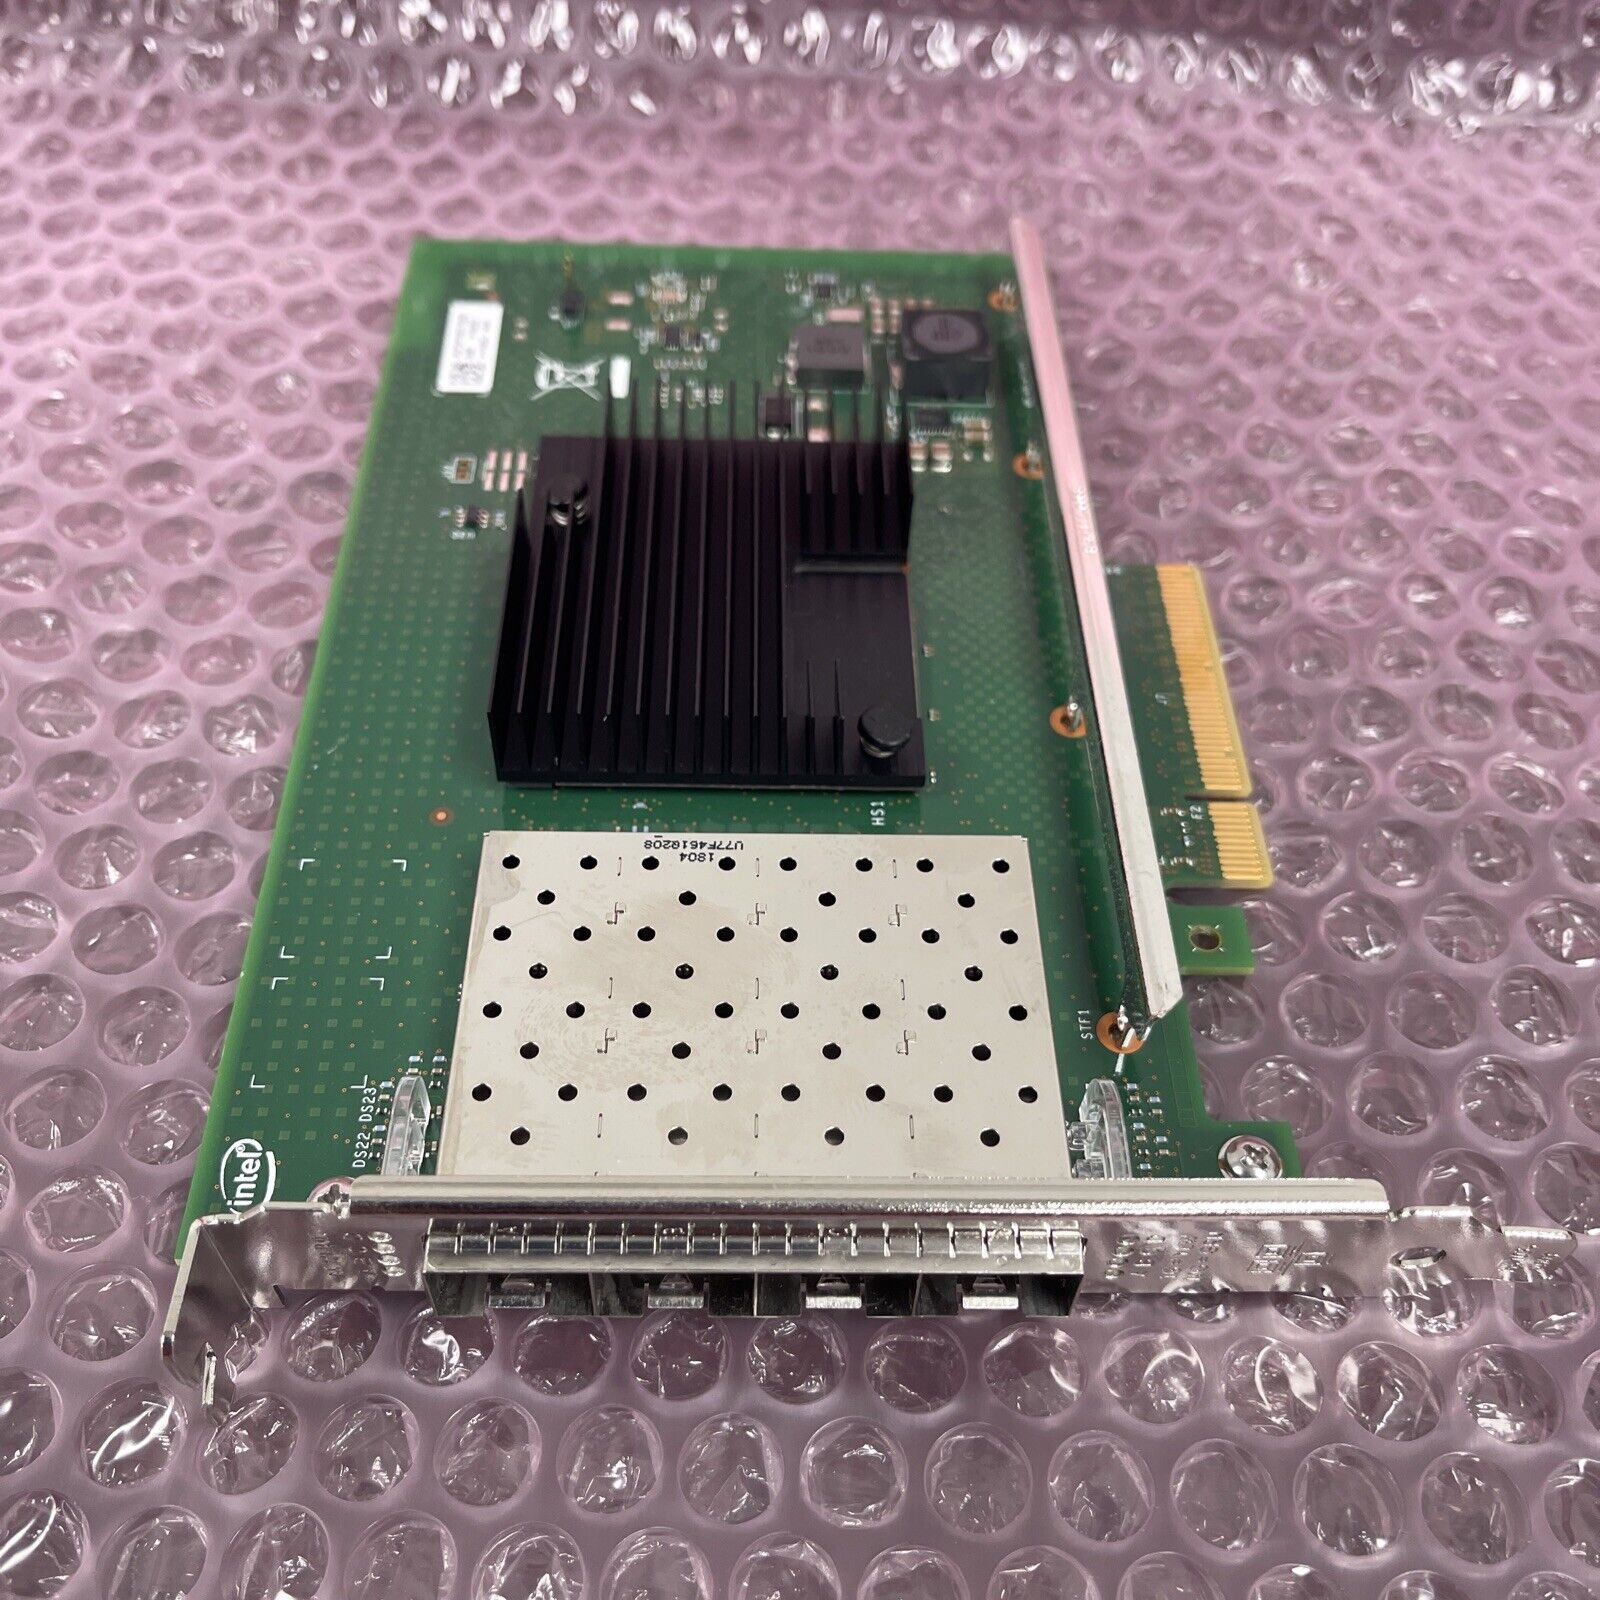 INTEL ETHERNETCNA X710-DA4 CARD Pulled From Working Environment ￼